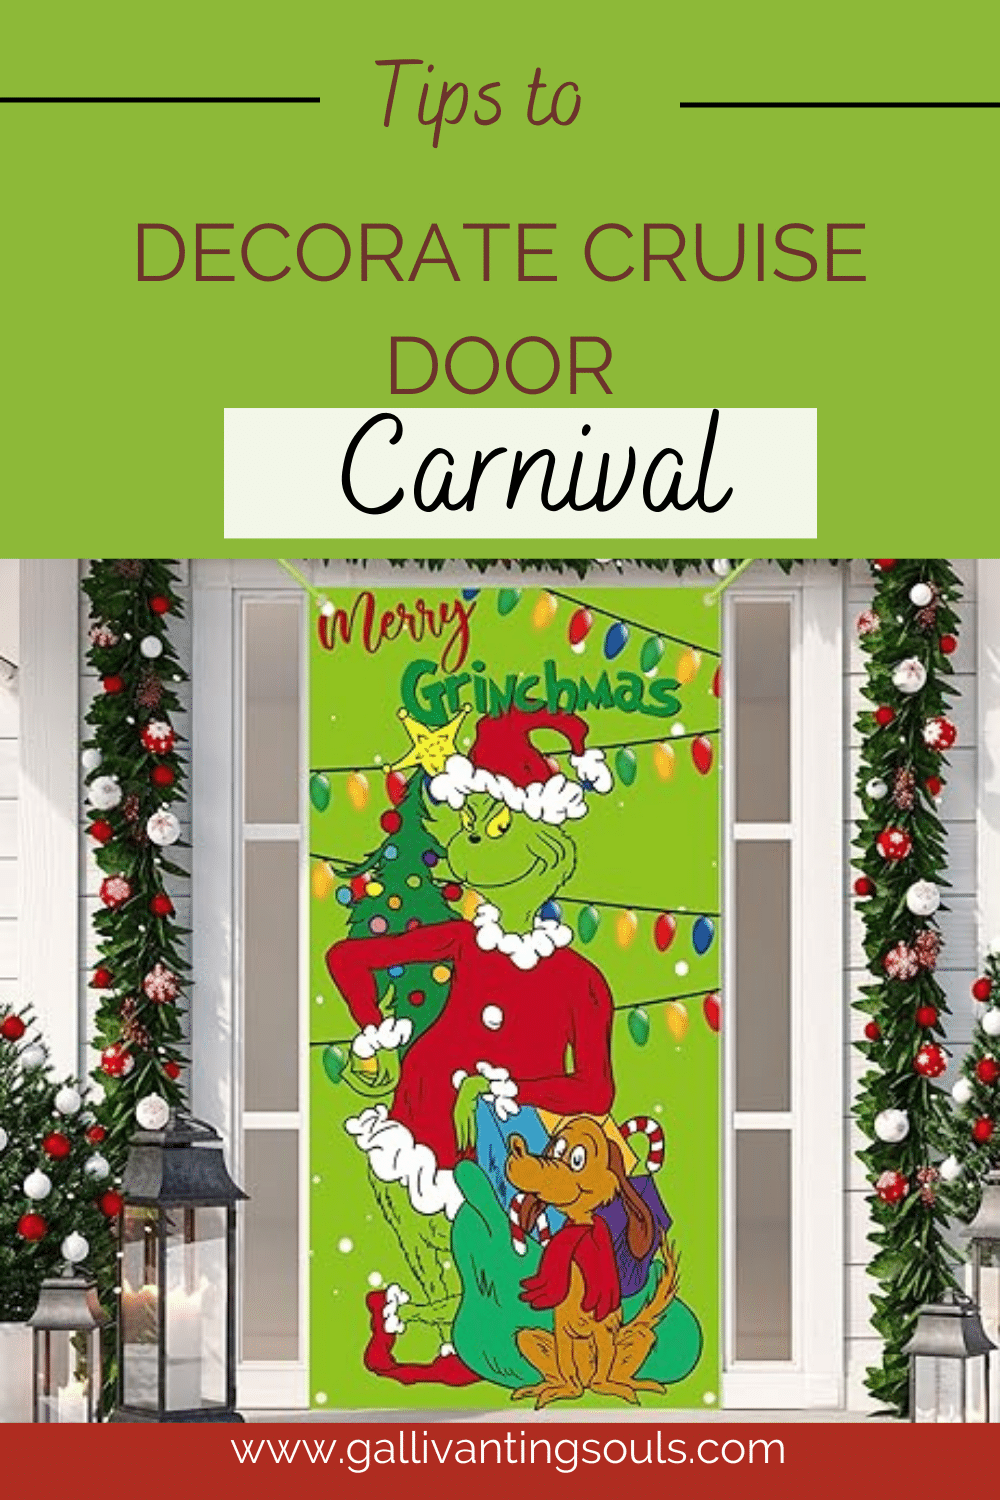 An inexpensive plastic door decoration found on Amazon is shown as an idea of something to decorate your cabin door on Carnival